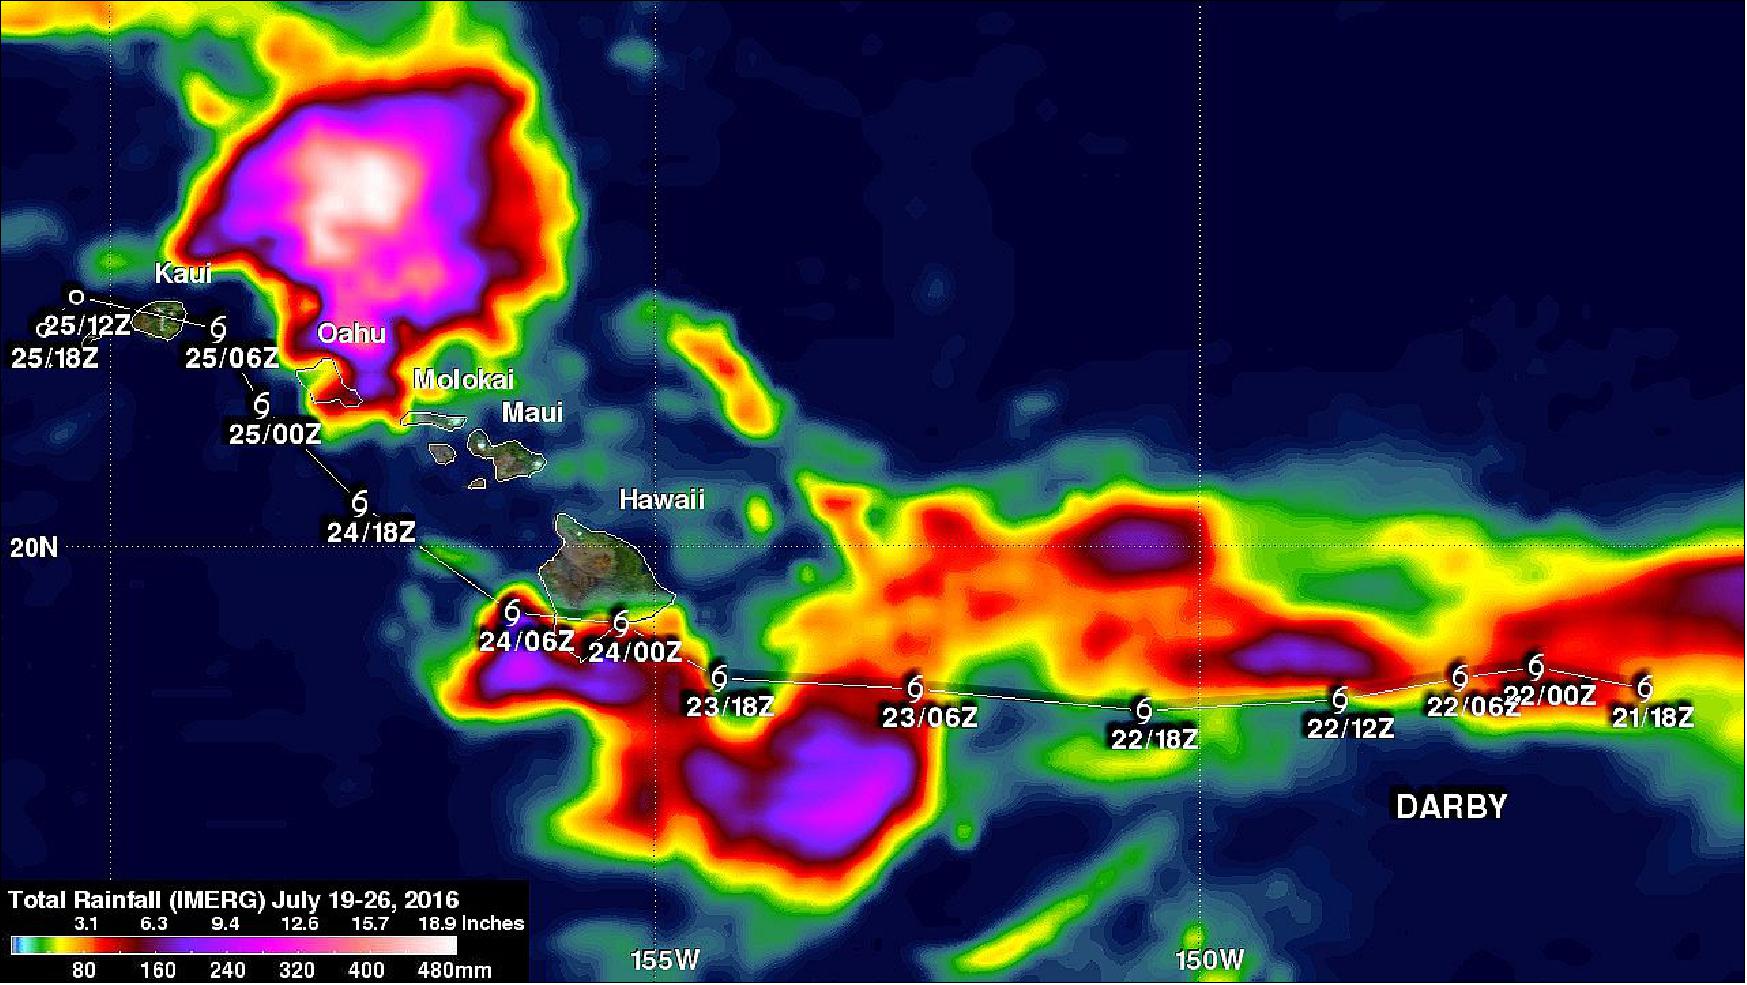 Figure 51: Estimates of rainfall accompanying tropical storm Darby were produced using NASA's IMERG (Integrated Multi-satellitE Retrievals for GPM) data. These IMERG rainfall accumulation totals were calculated for the period from July 19-26, 2016.Darby had weakened from a category one hurricane to a tropical storm before moving into the Central Pacific. The IMERG estimates indicate that Darby dropped extremely heavy rainfall at times. The greatest rainfall total estimates during this period were located north of Oahu where 480 mm fell (image credit: SSAI/NASA/GSFC, Hal Pierce)